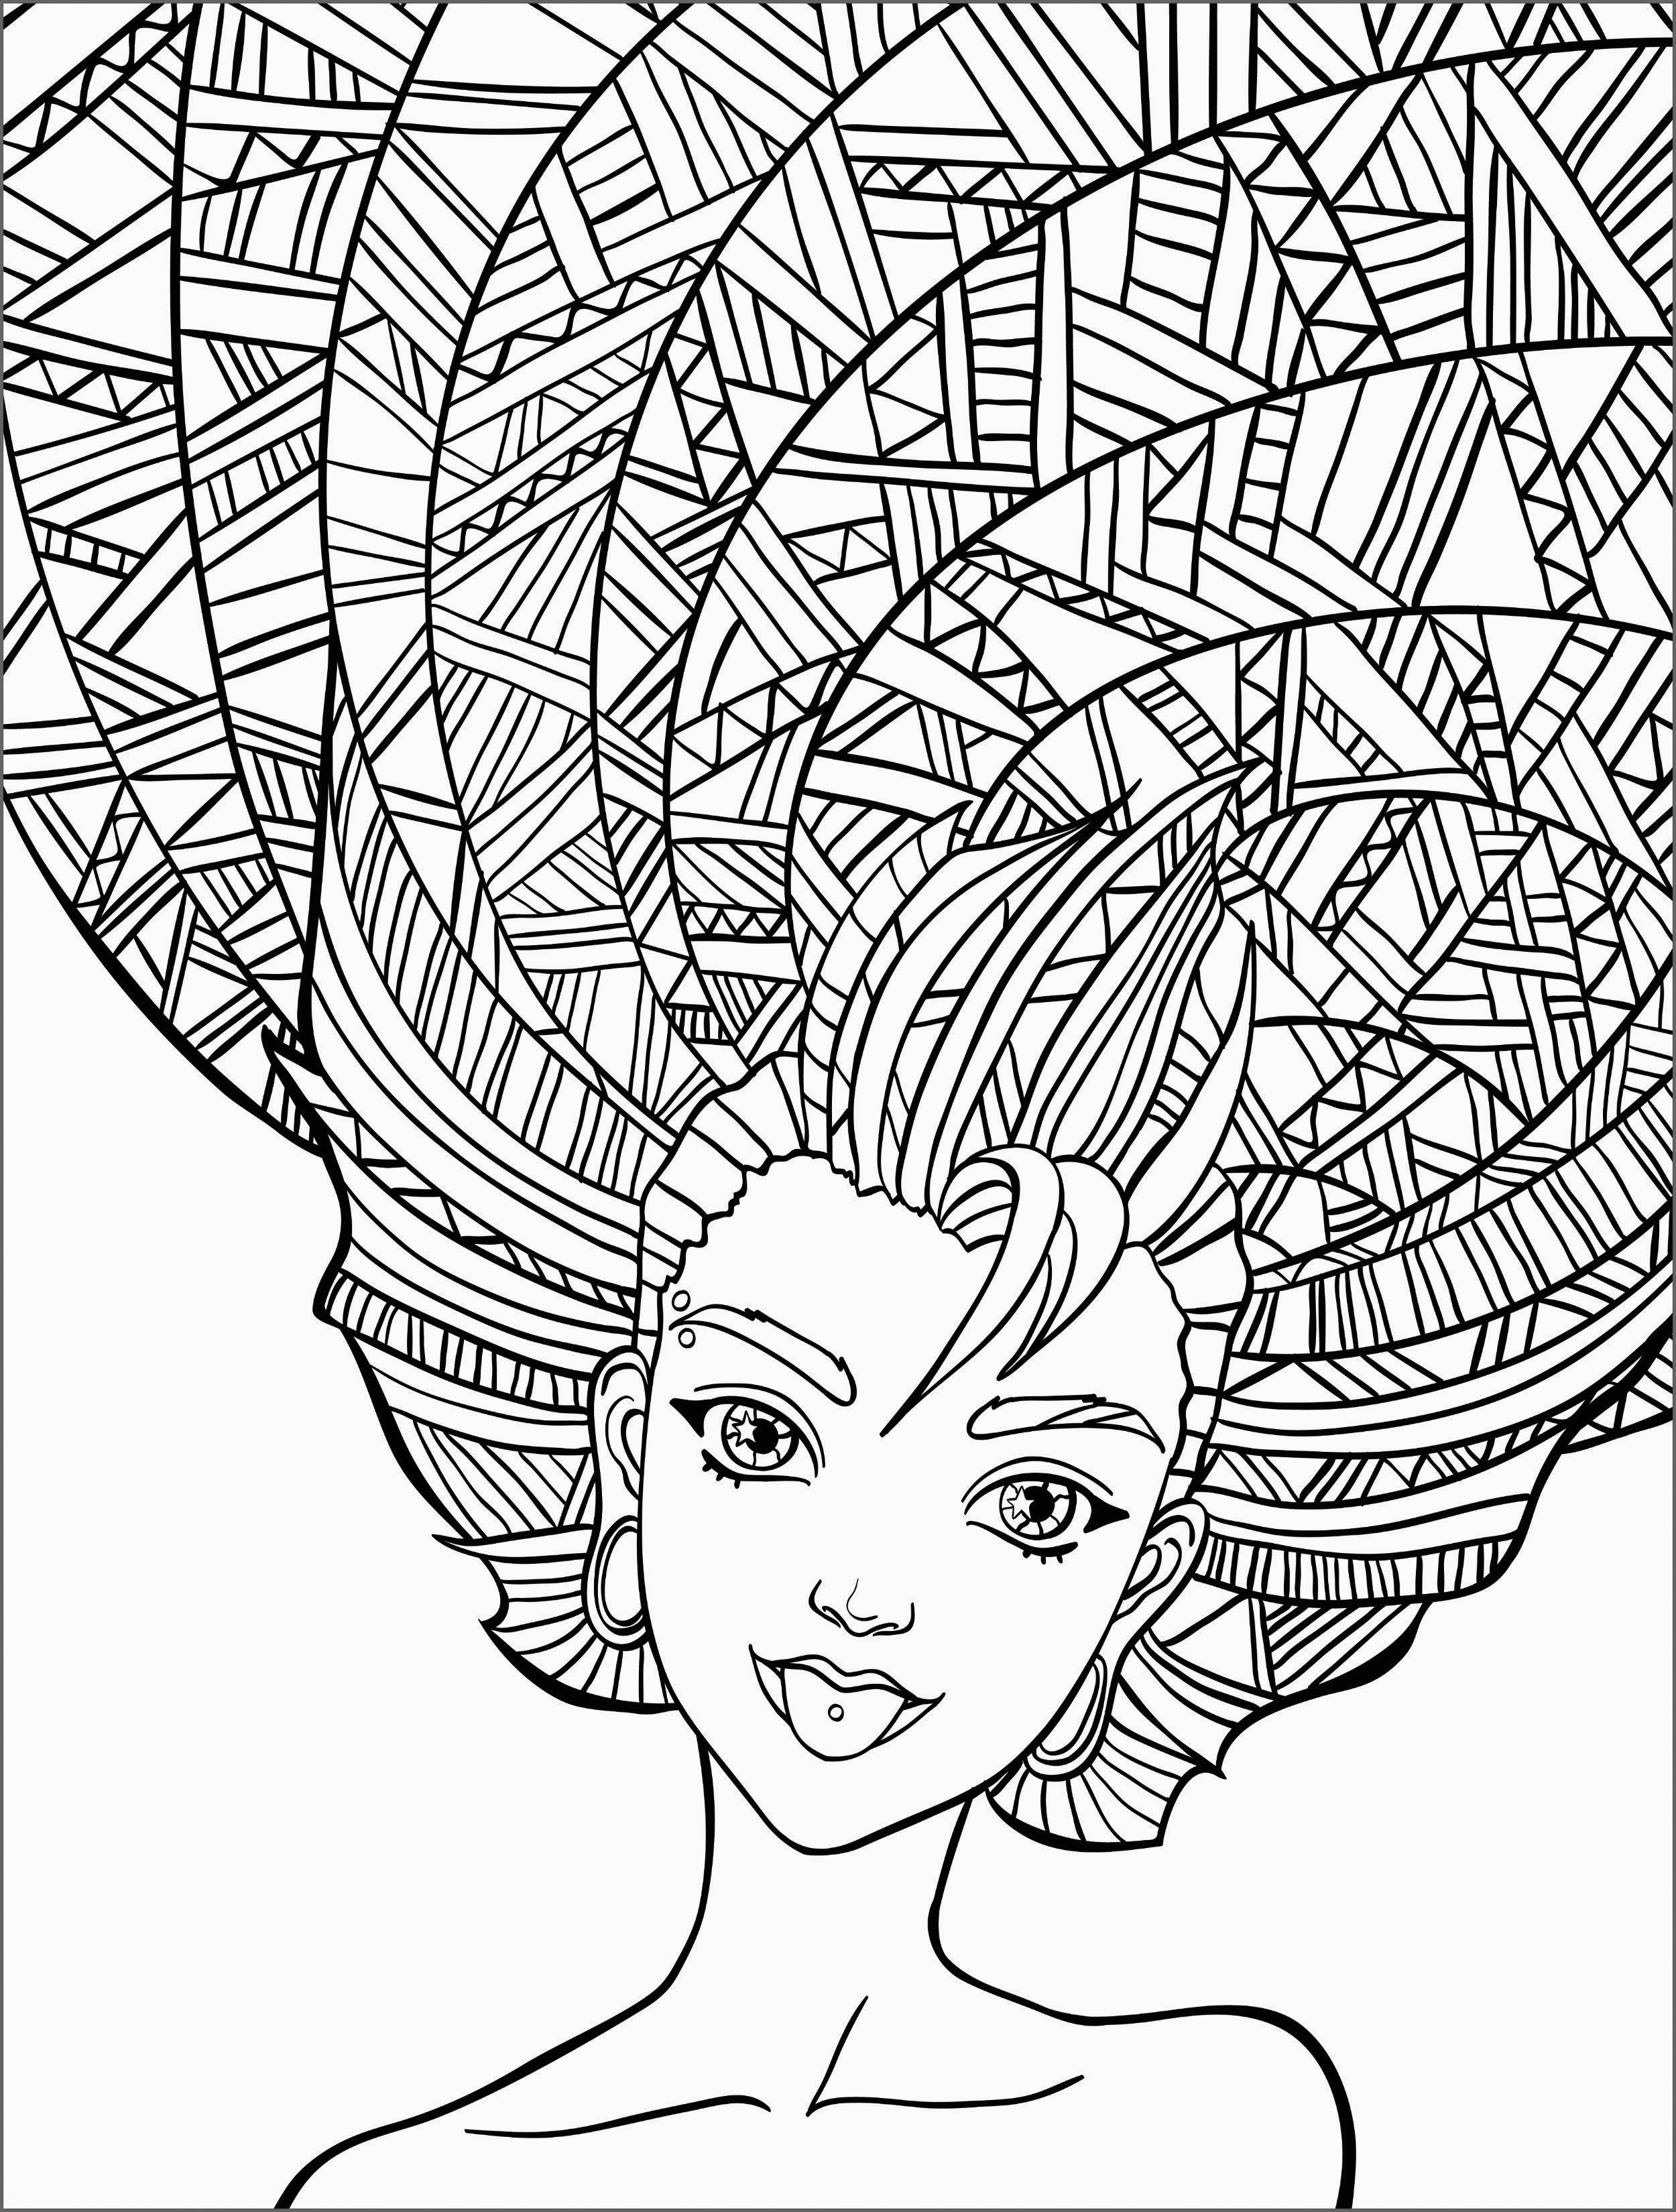 Download Coloring Pages for Adults - Best Coloring Pages For Kids